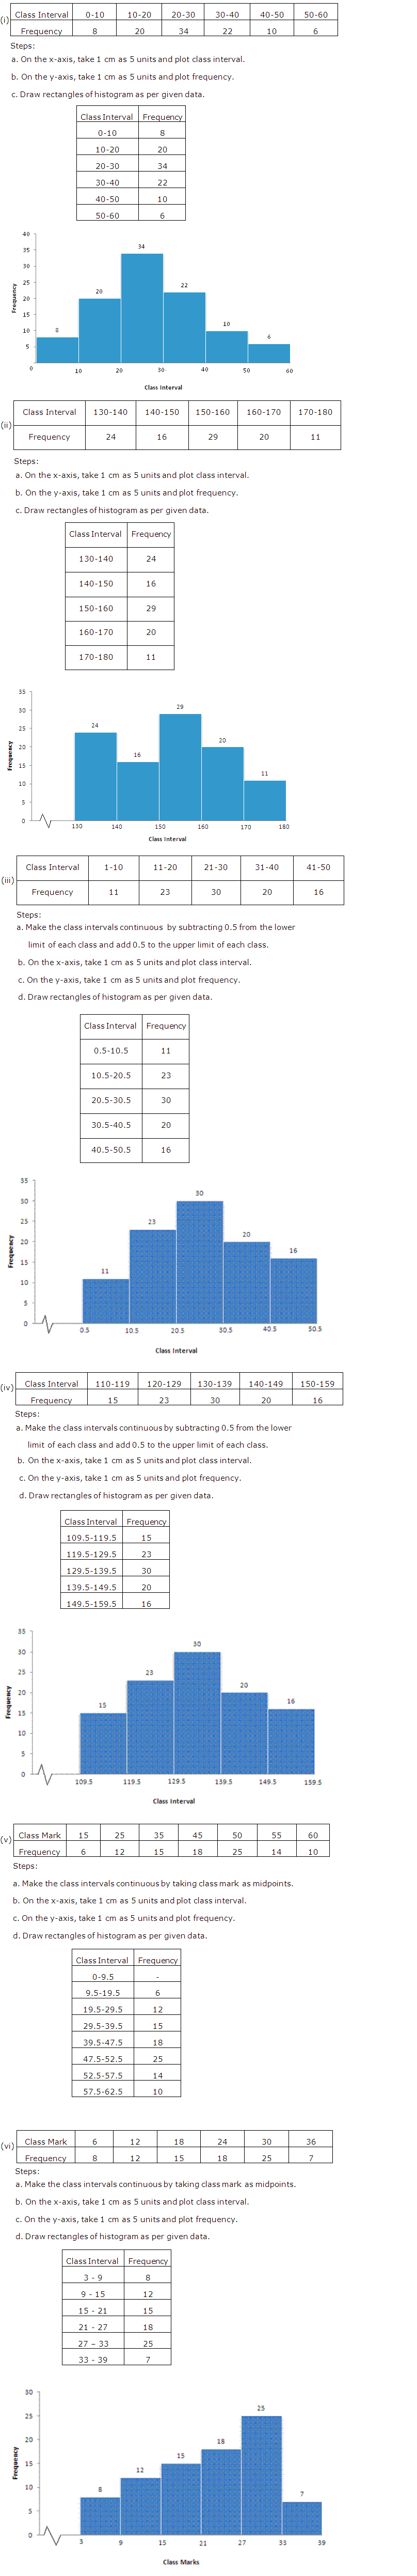 Frank Solutions Icse Class 10 Mathematics Chapter - Graphical Representations